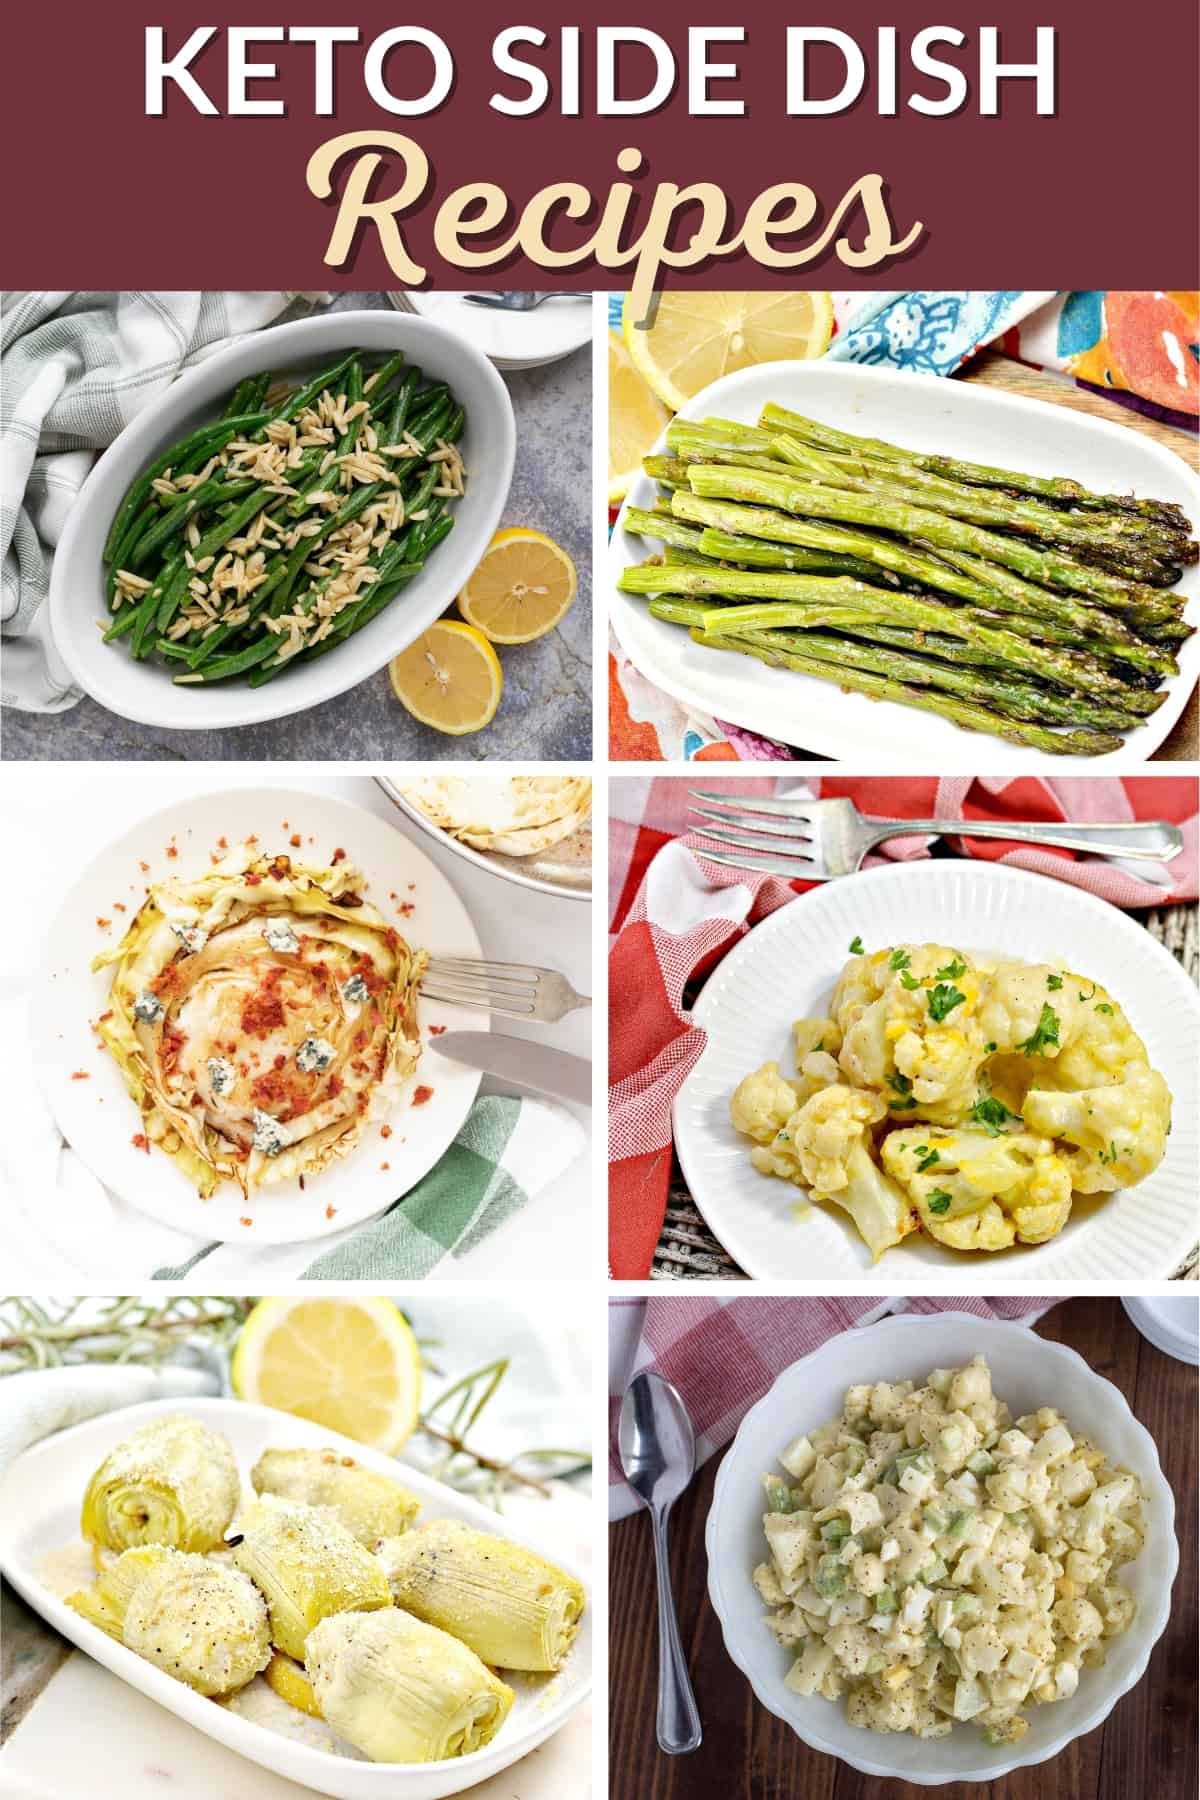 Easy low-carb keto side dish recipes